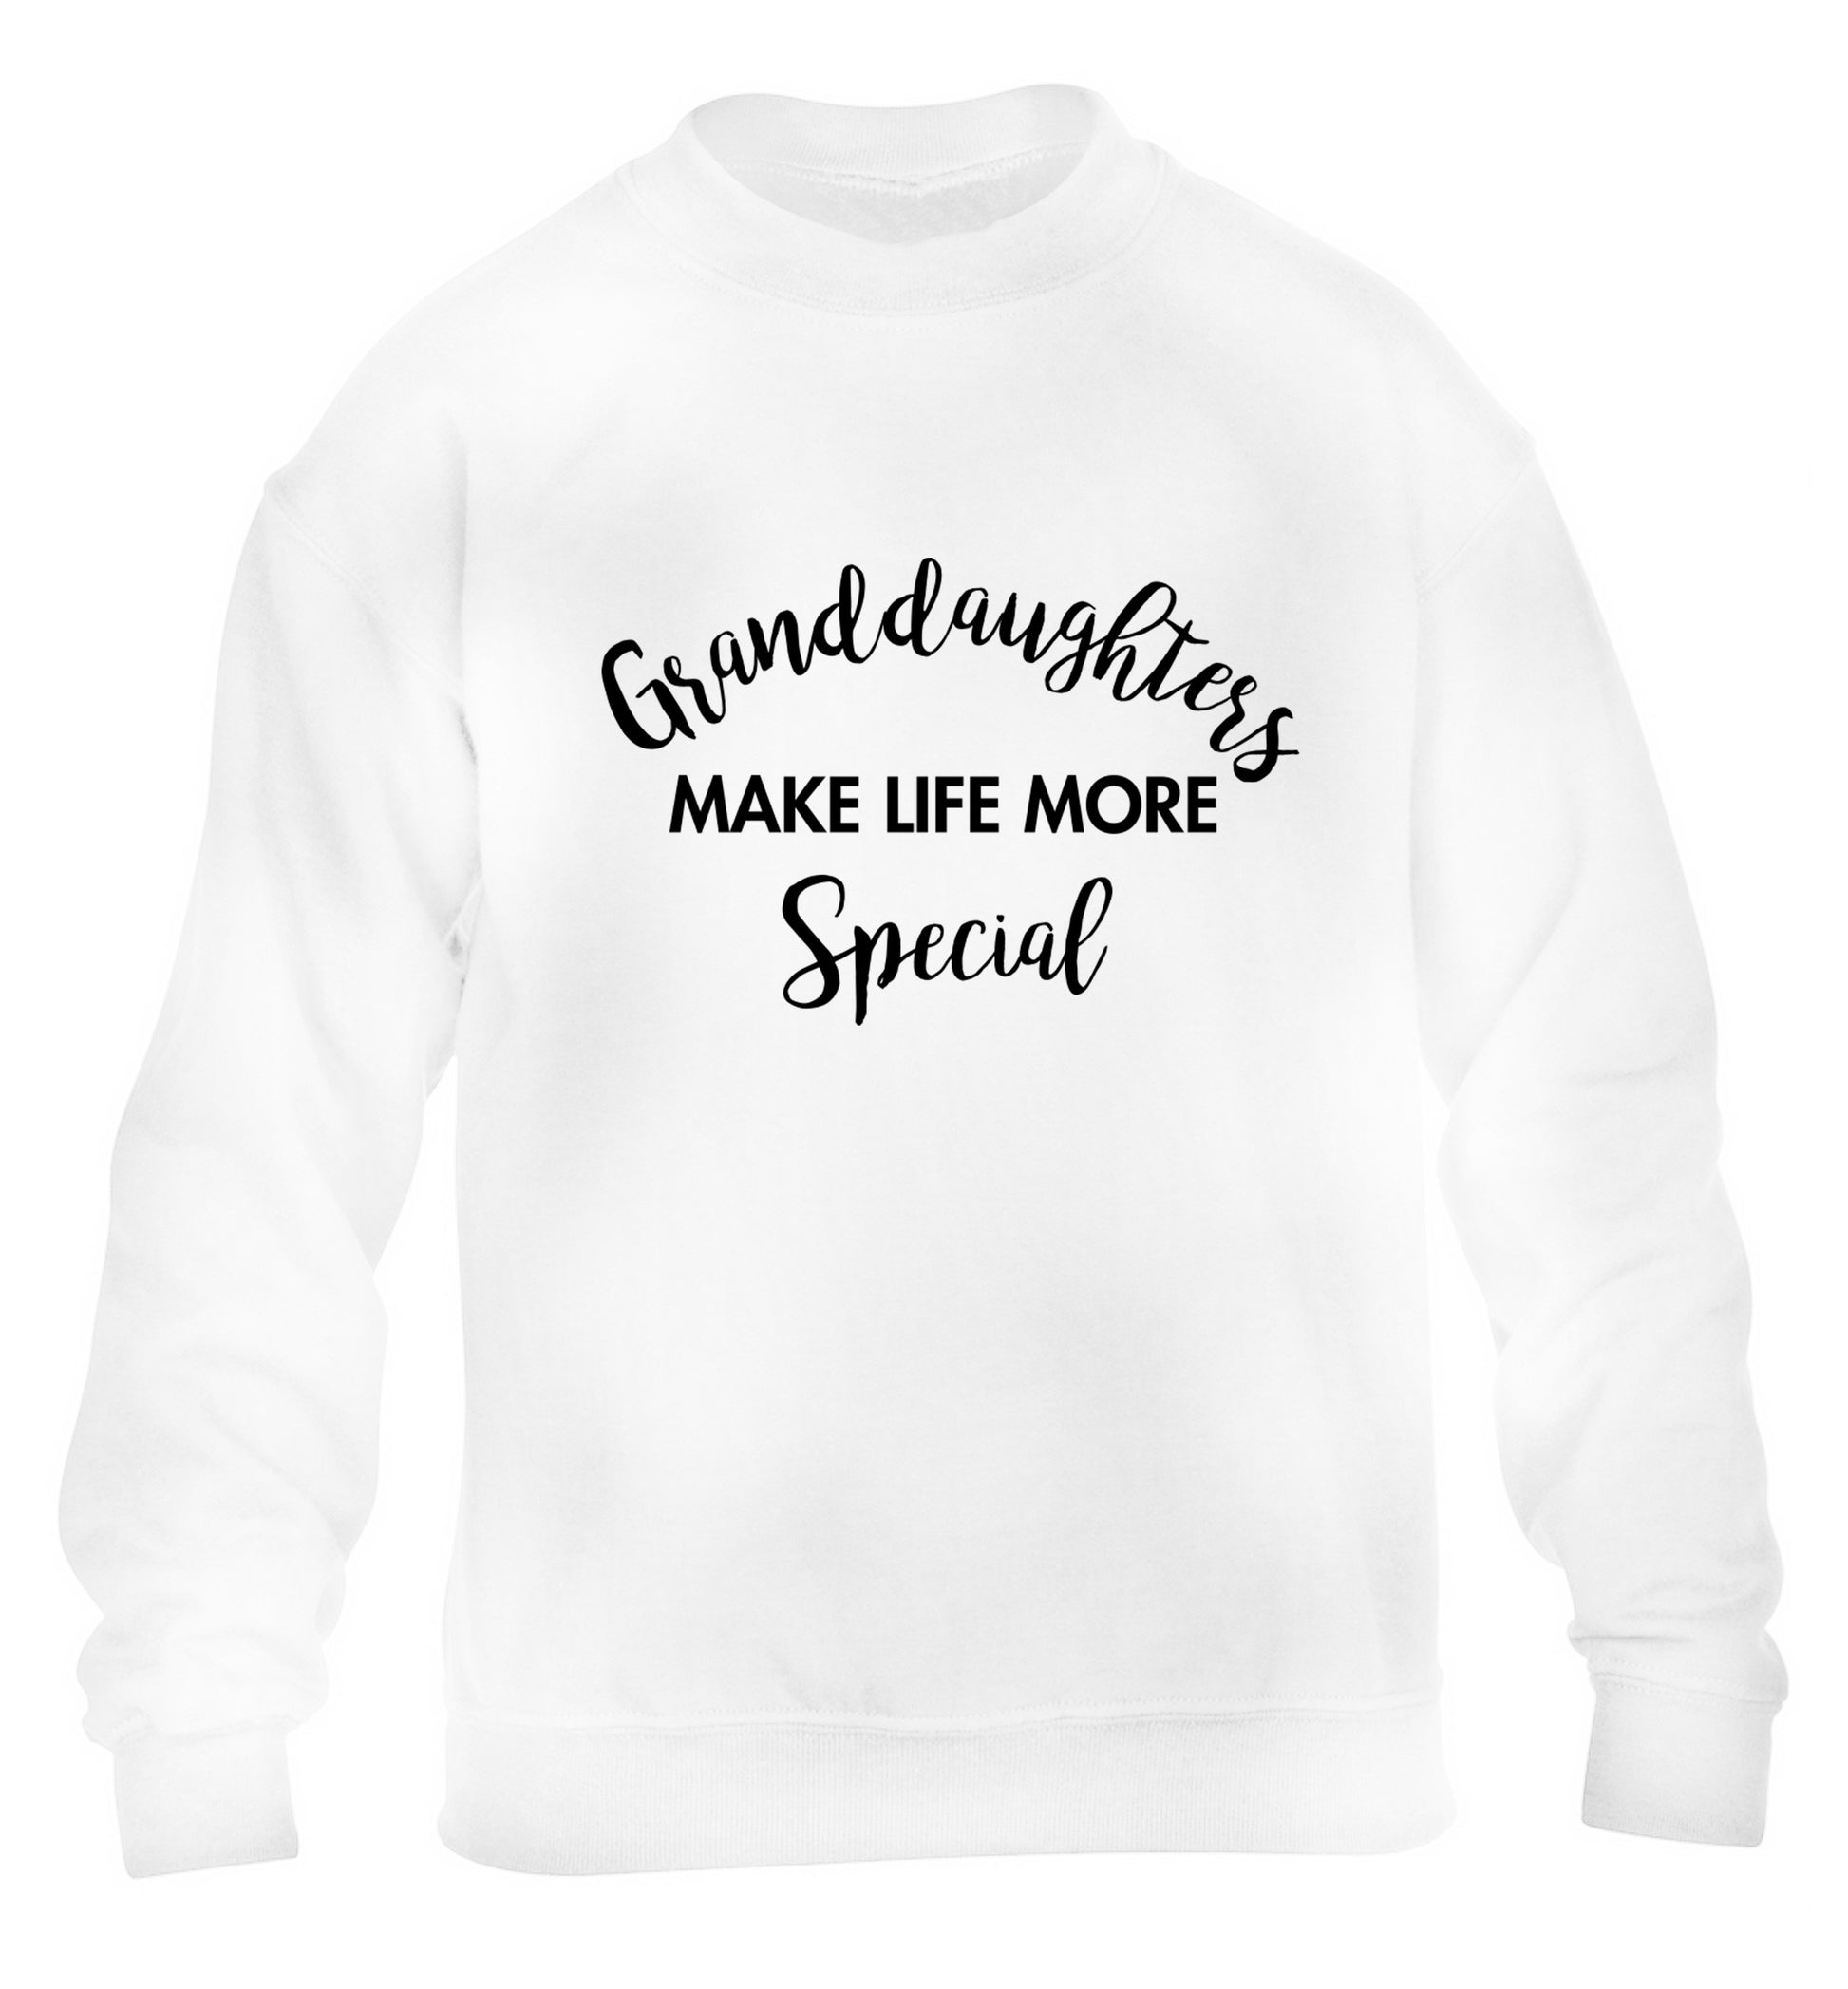 Granddaughters make life more special children's white sweater 12-14 Years